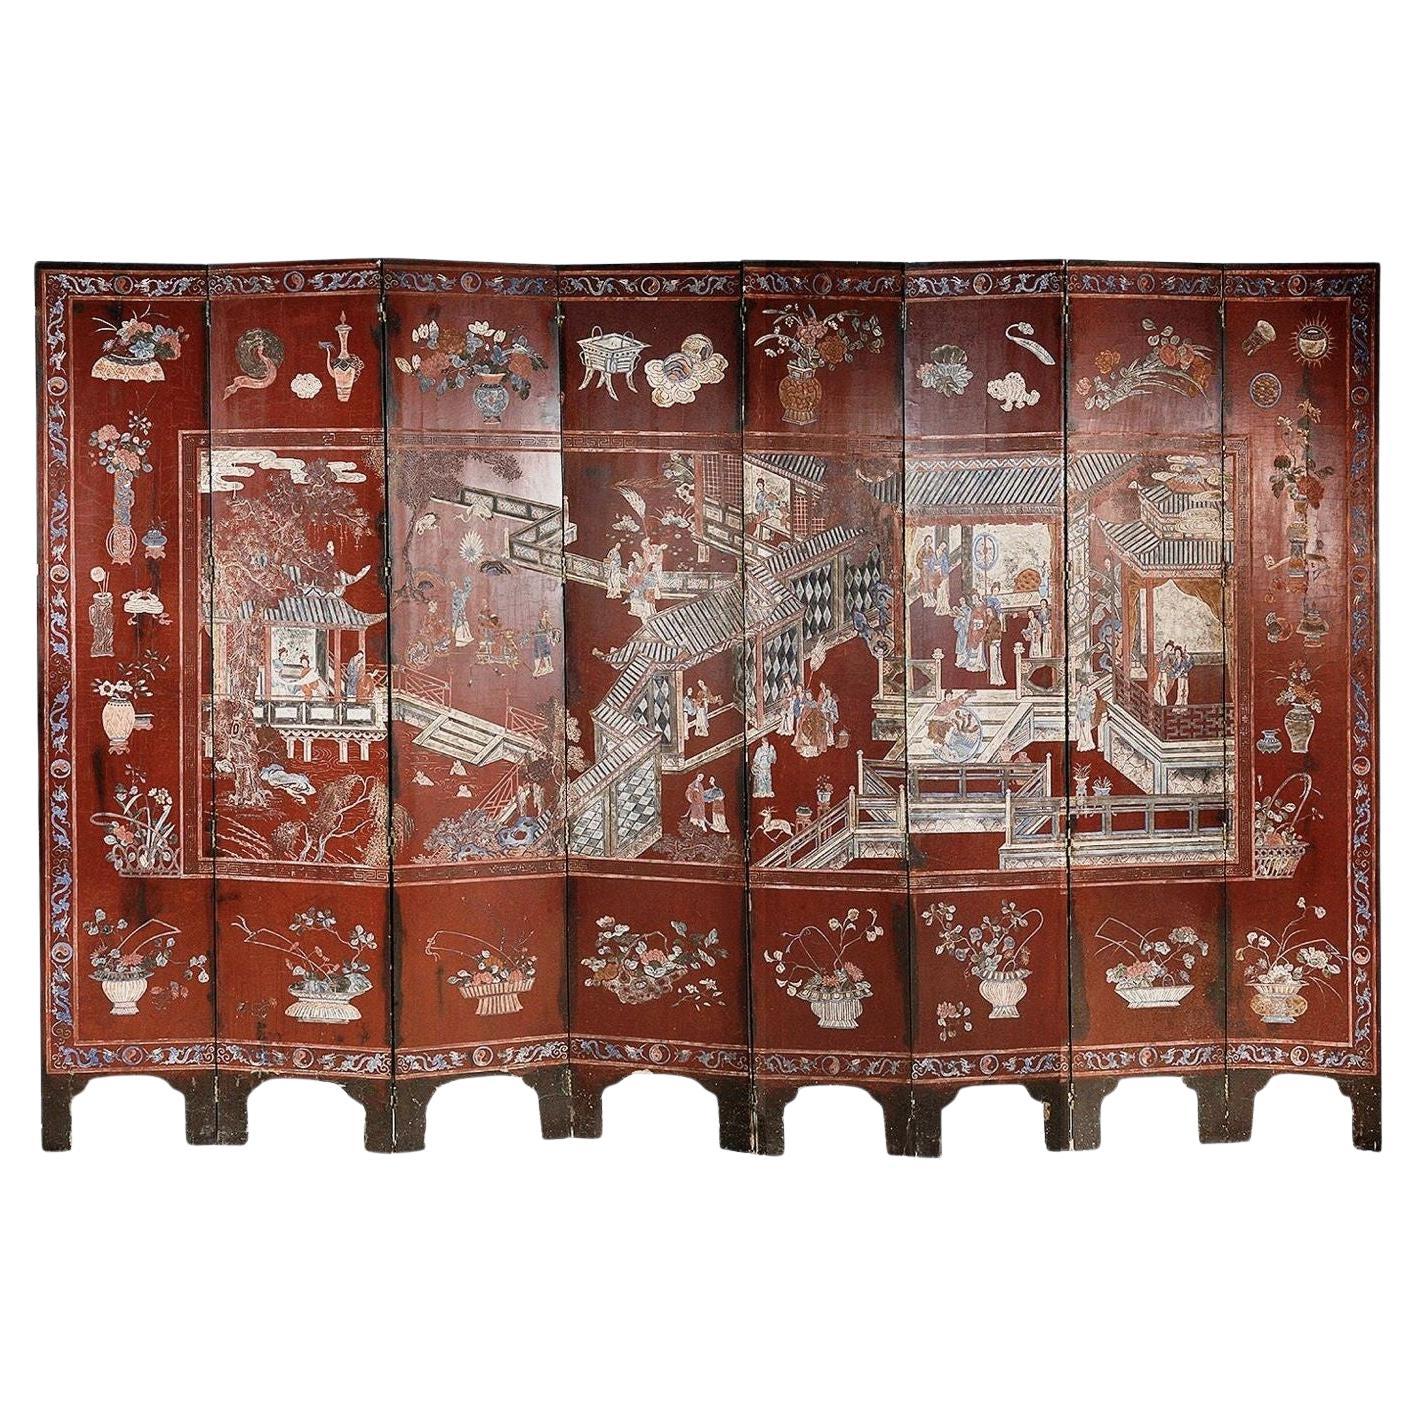 Early 19th Century Chinese Coromandel Lacquer Screen For Sale